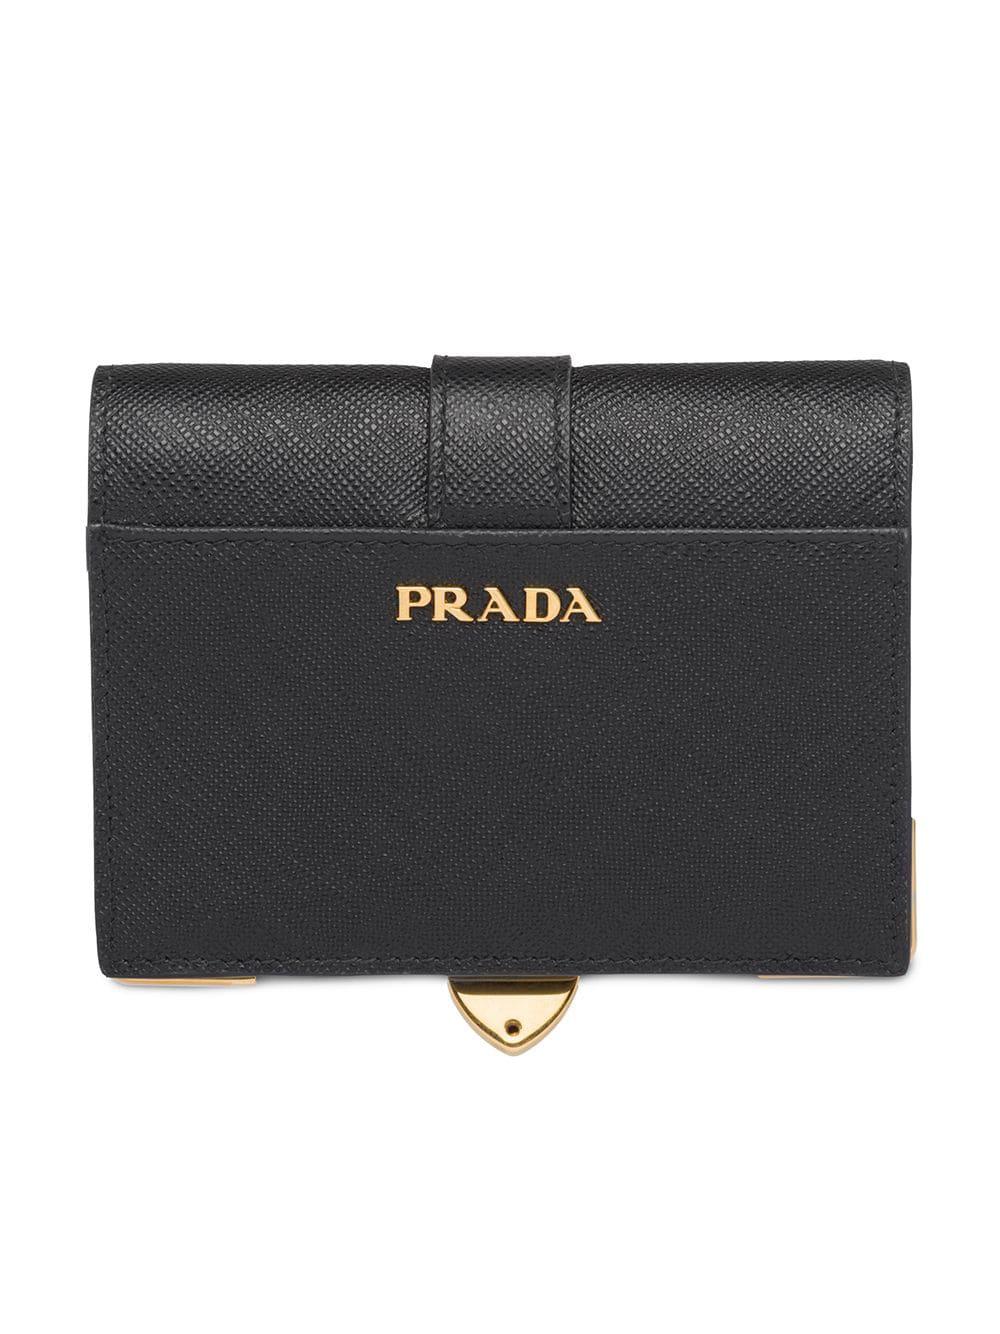 Prada Small Cahier Saffiano Leather Wallet in Black | Lyst